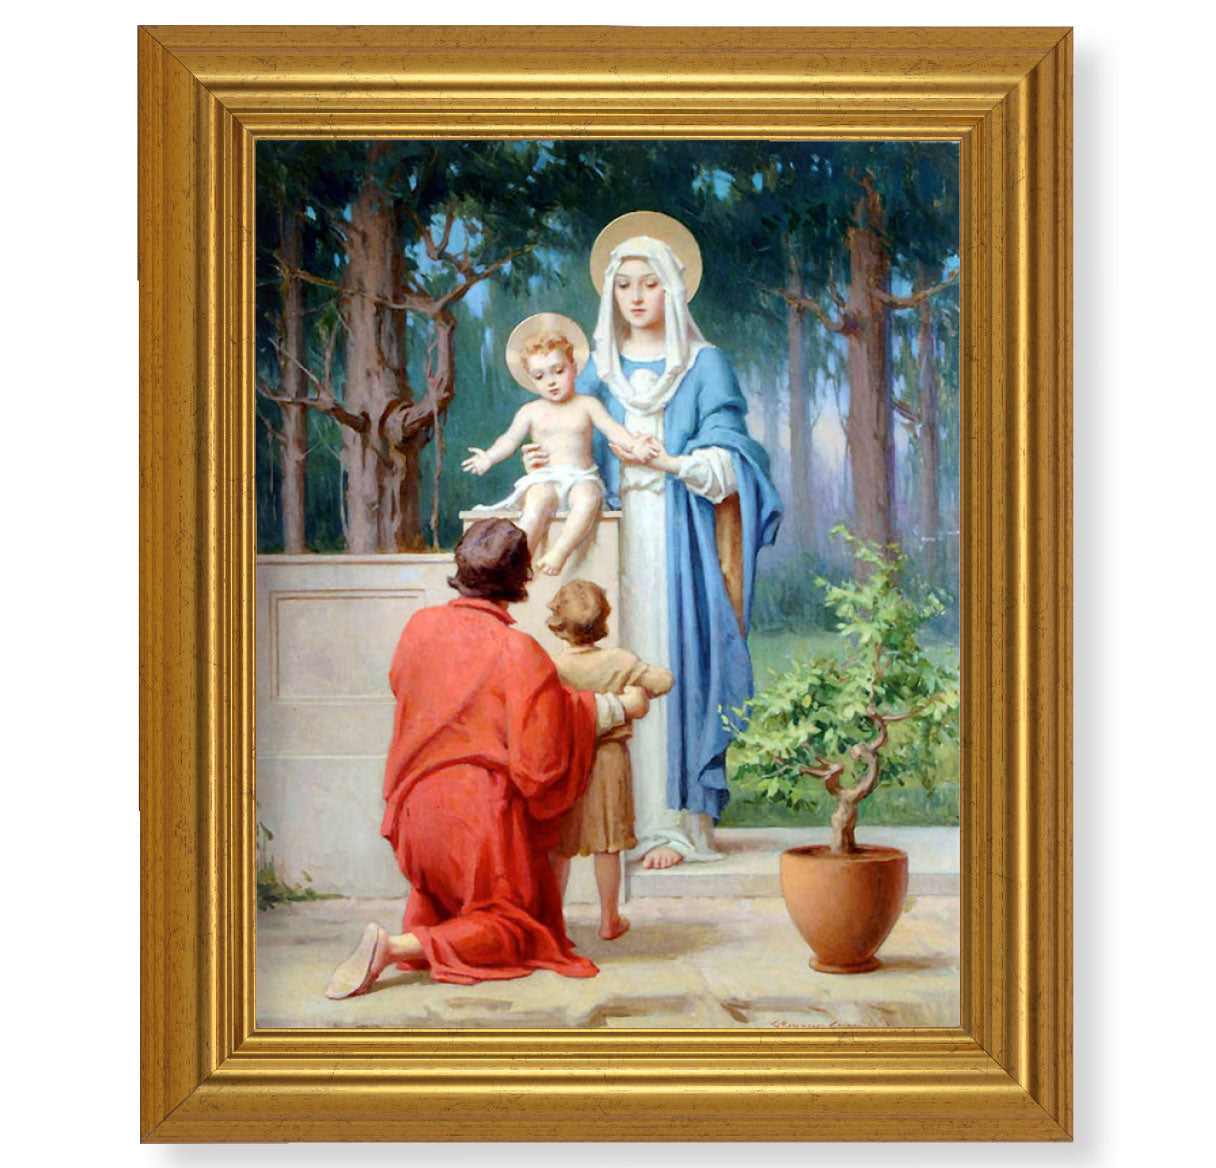 Holy Family with St. John the Baptist Picture Framed Wall Art Decor, Large, Antique Gold-Leaf Classic Frame